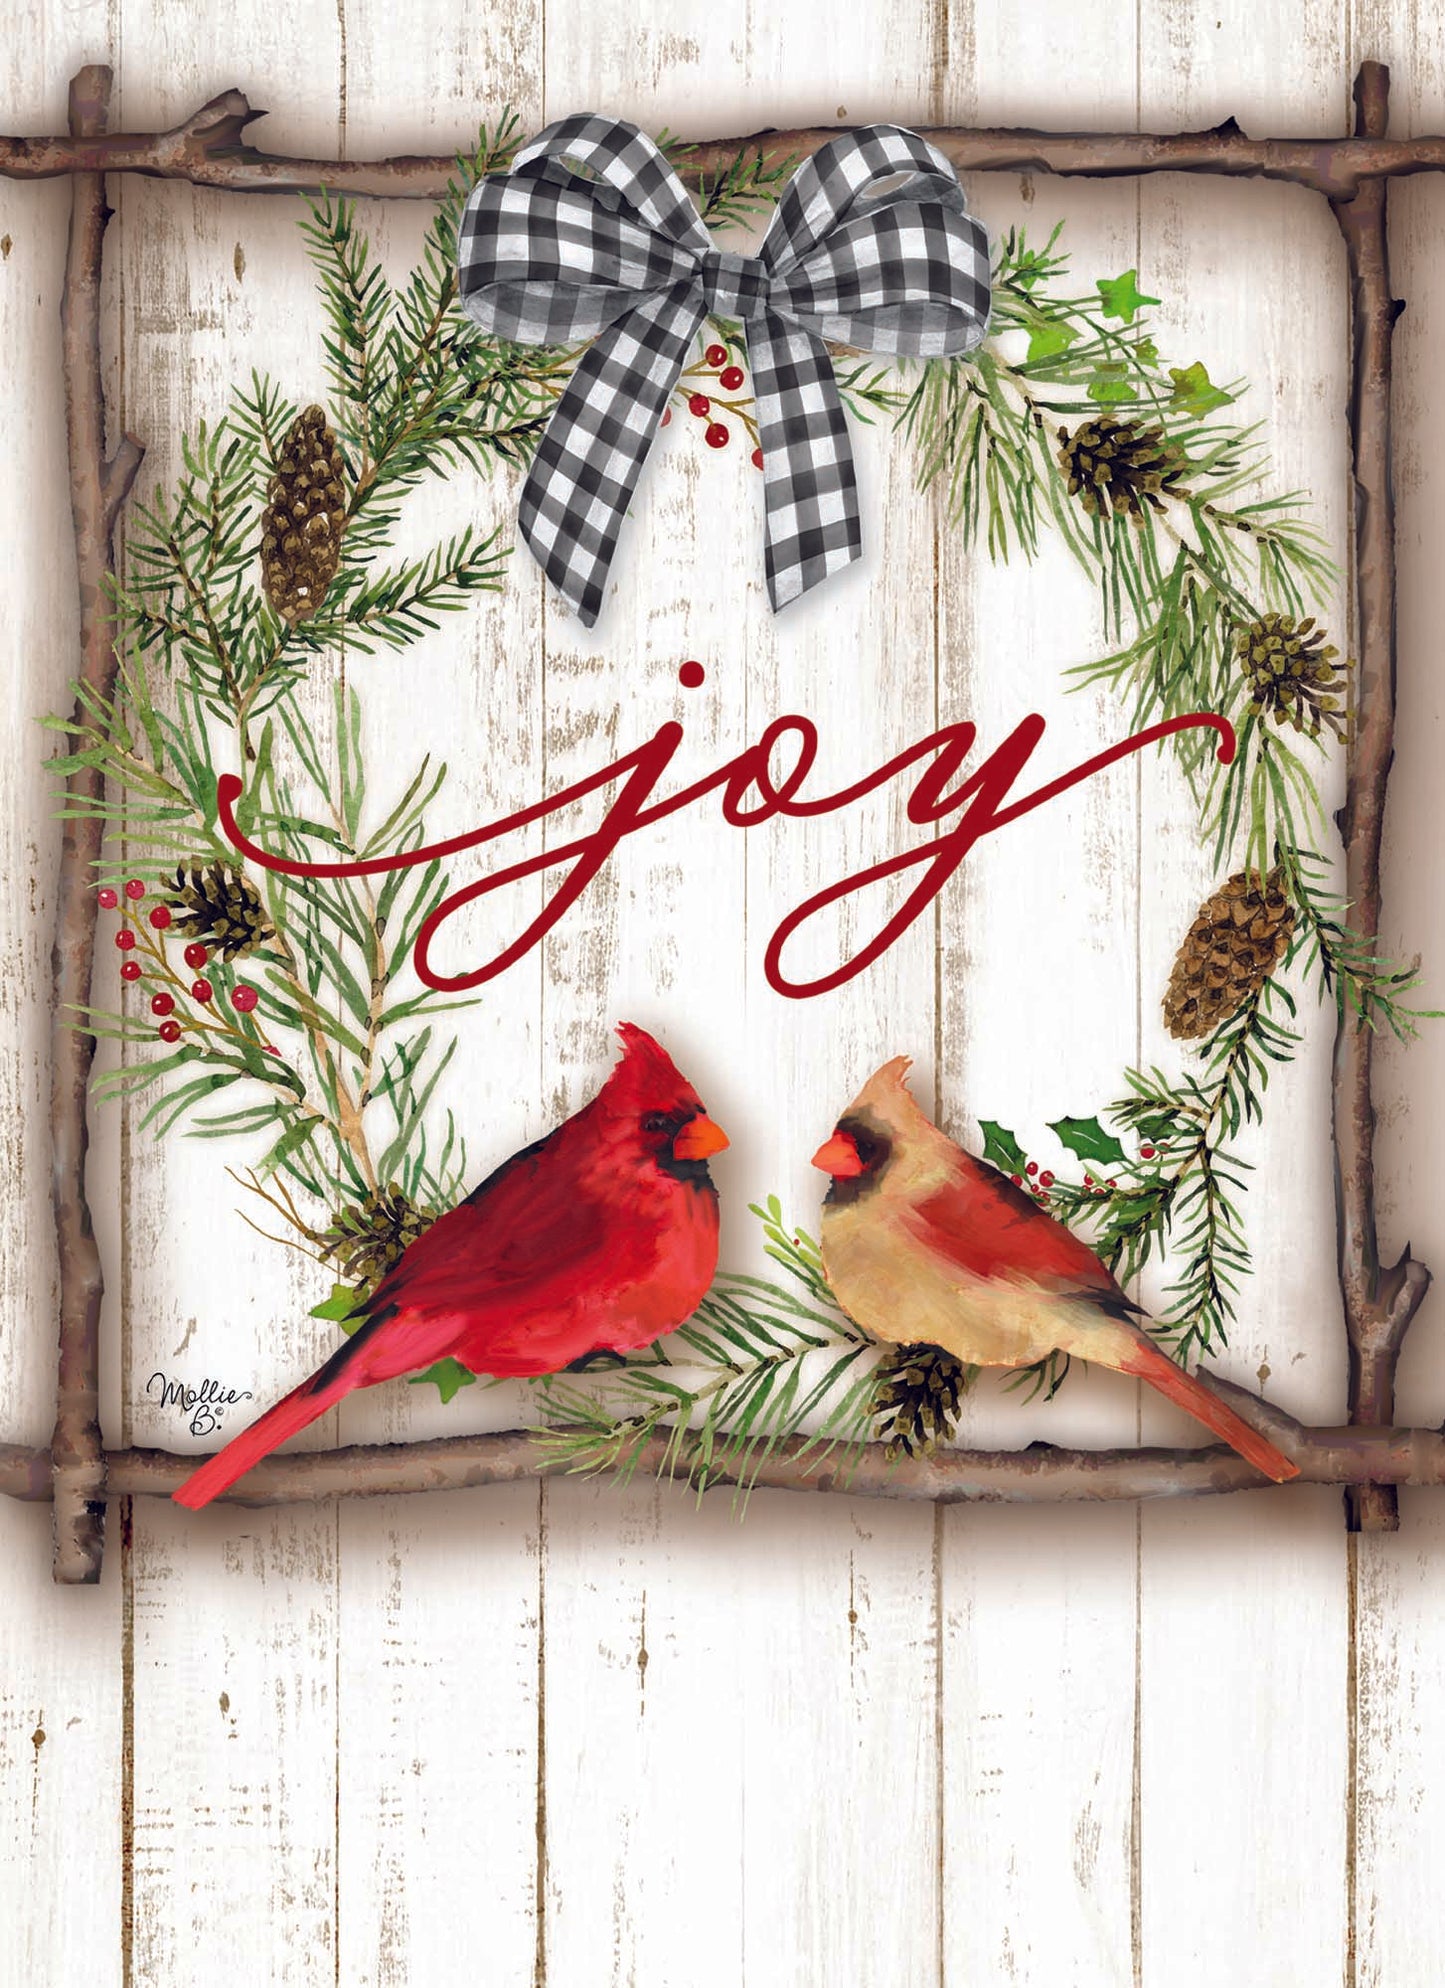 Joy to the World, Box of 12 Assorted Christmas Cards